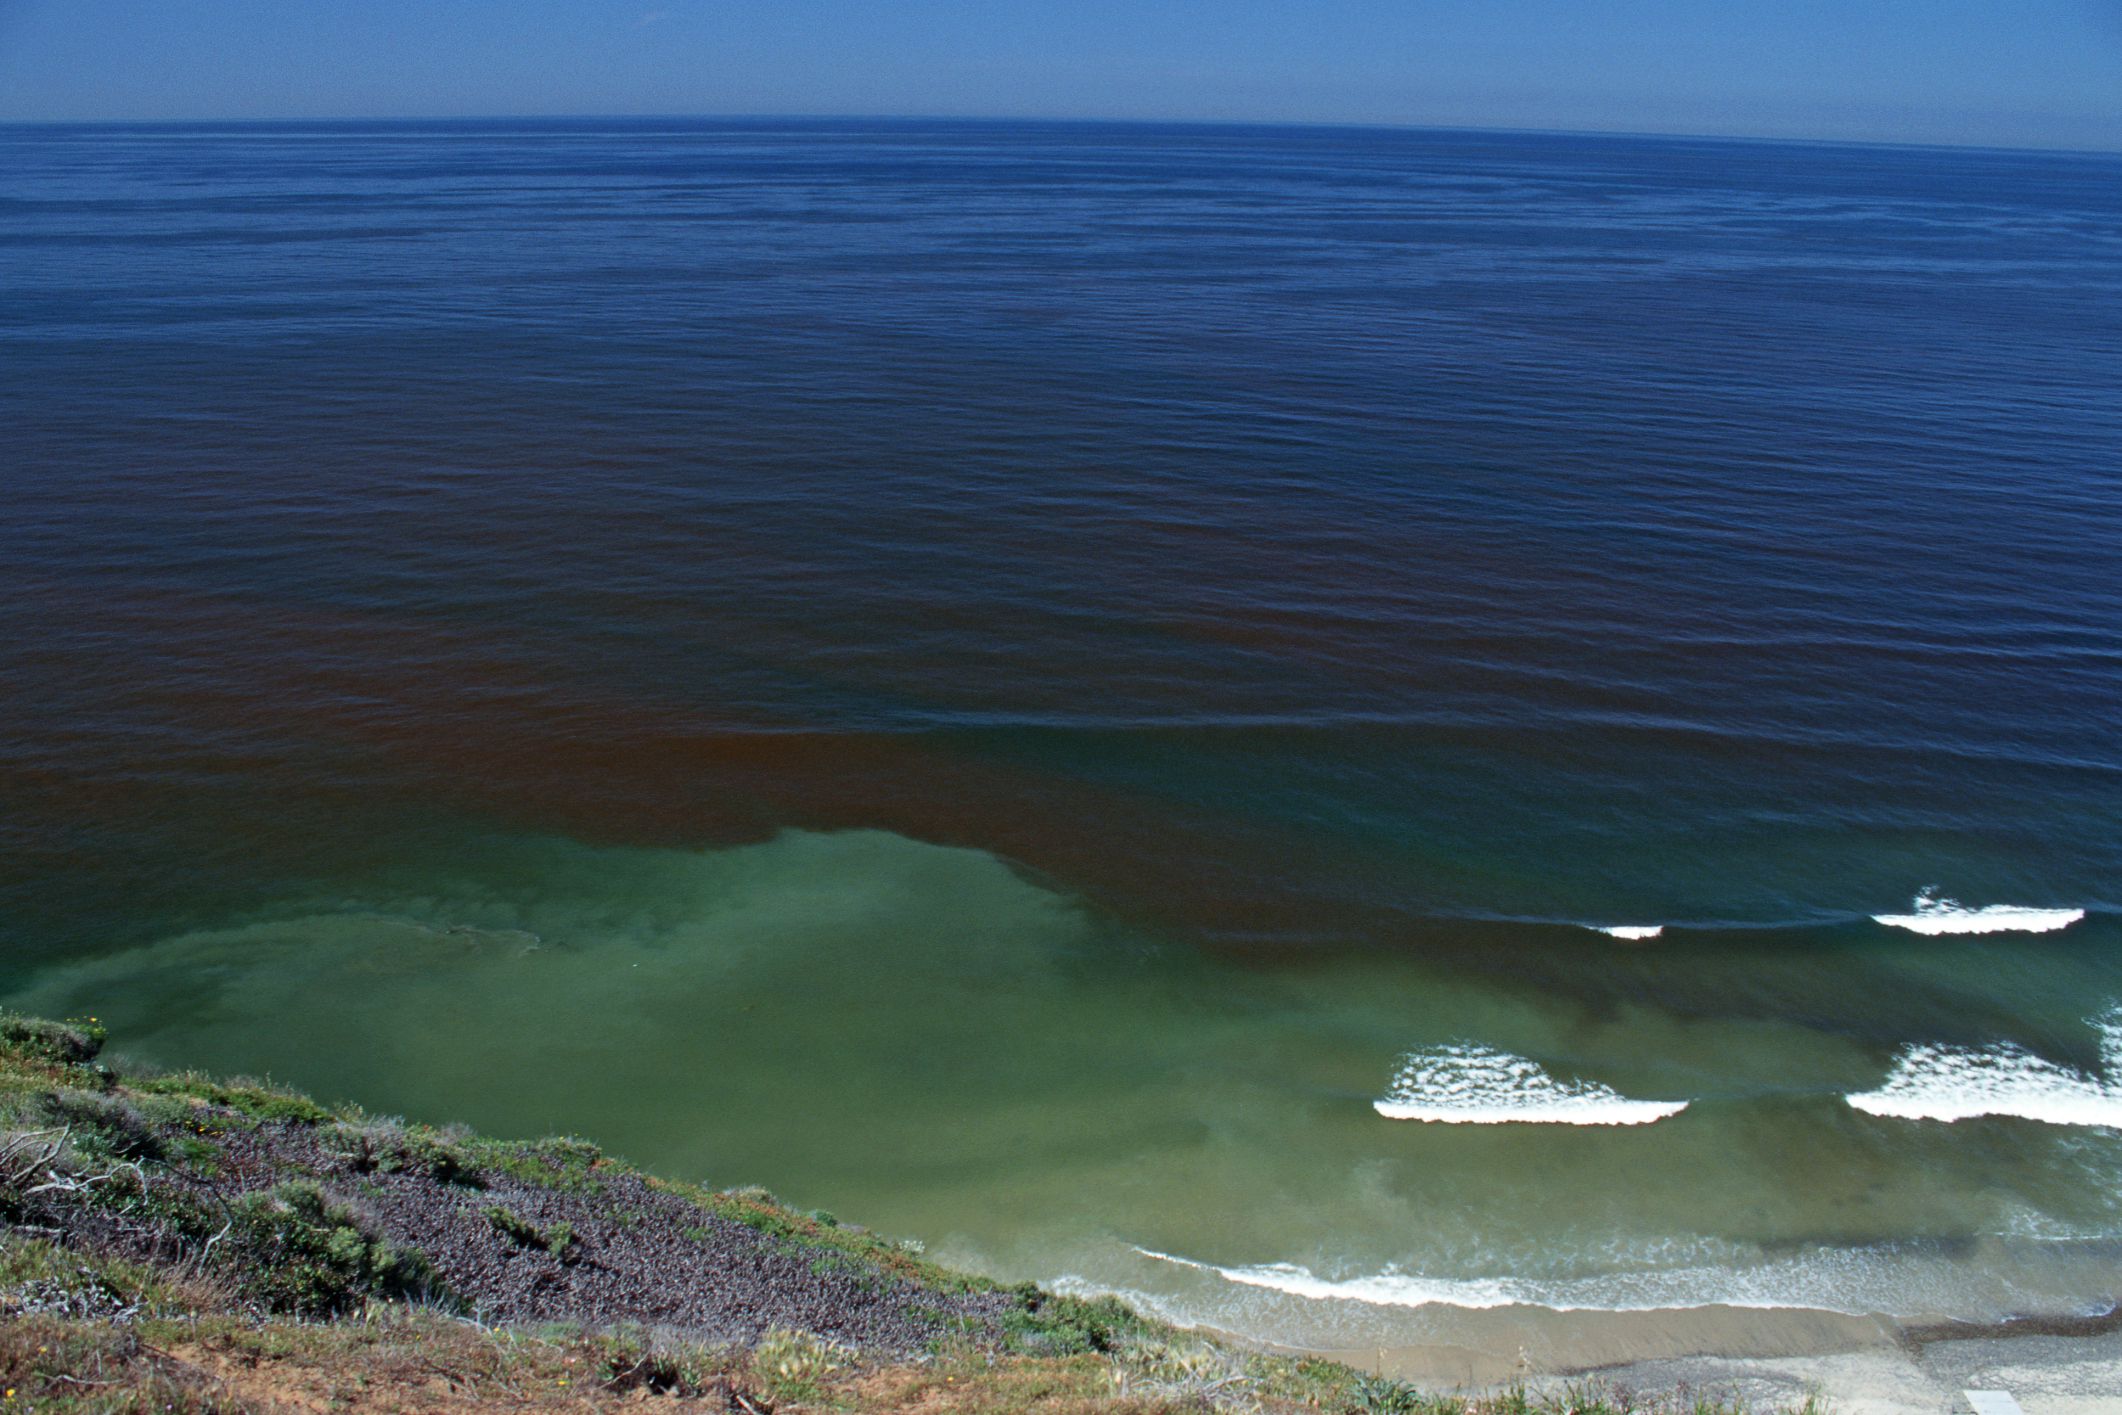 Red Tides and Other Harmful Algae Blooms